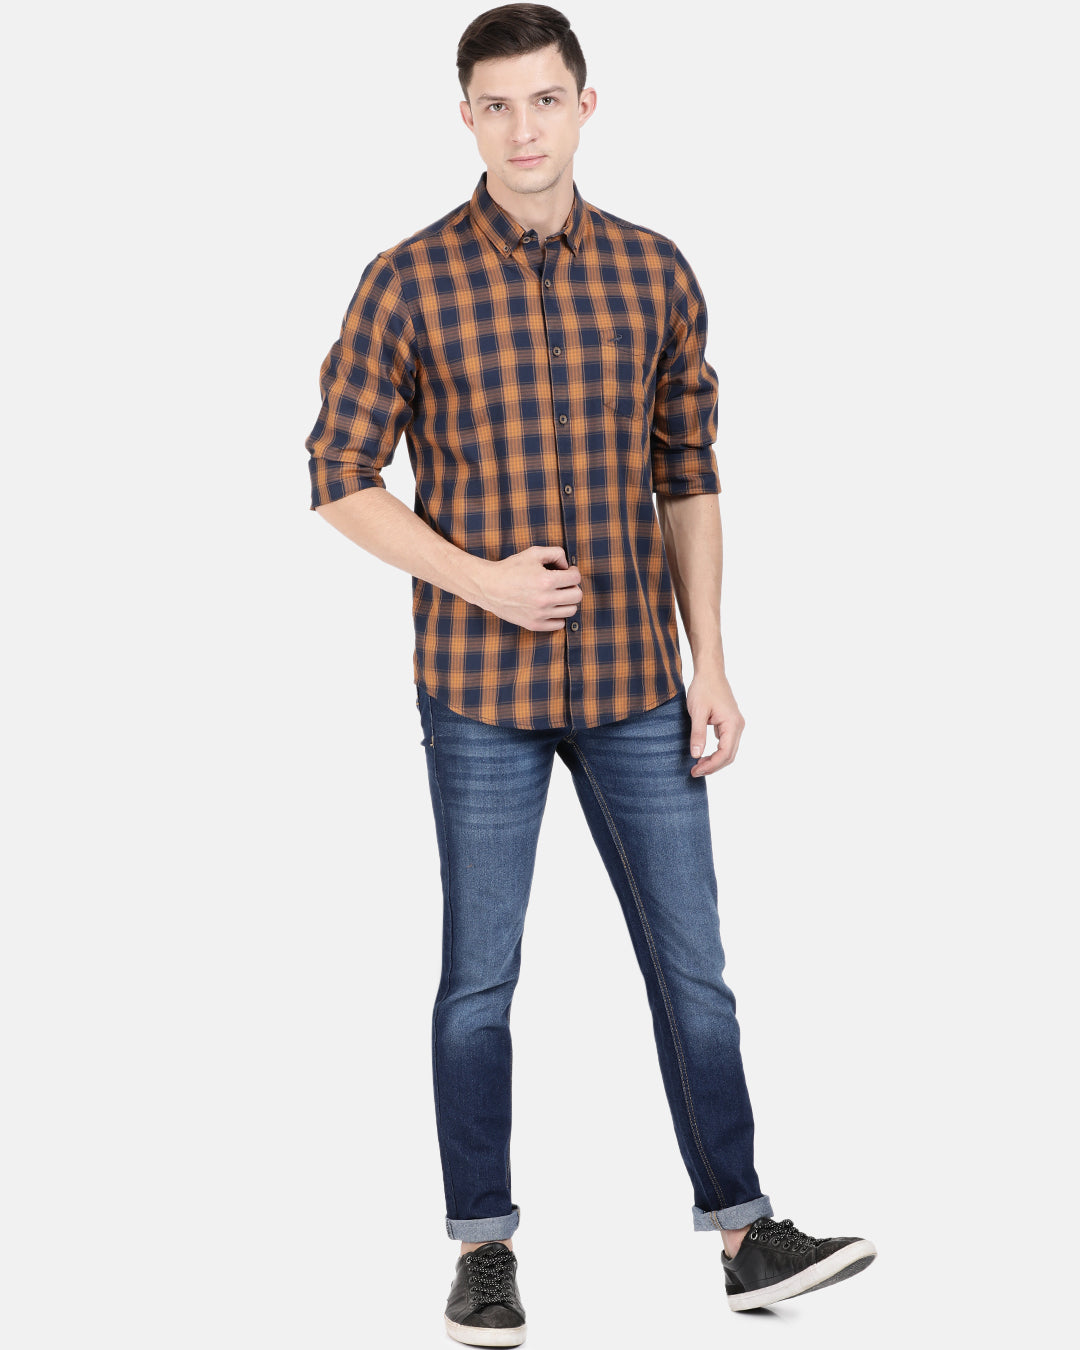 Crocodile Casual Full Sleeve Slim Fit Checks Brown Navy with Collar Shirt for Men